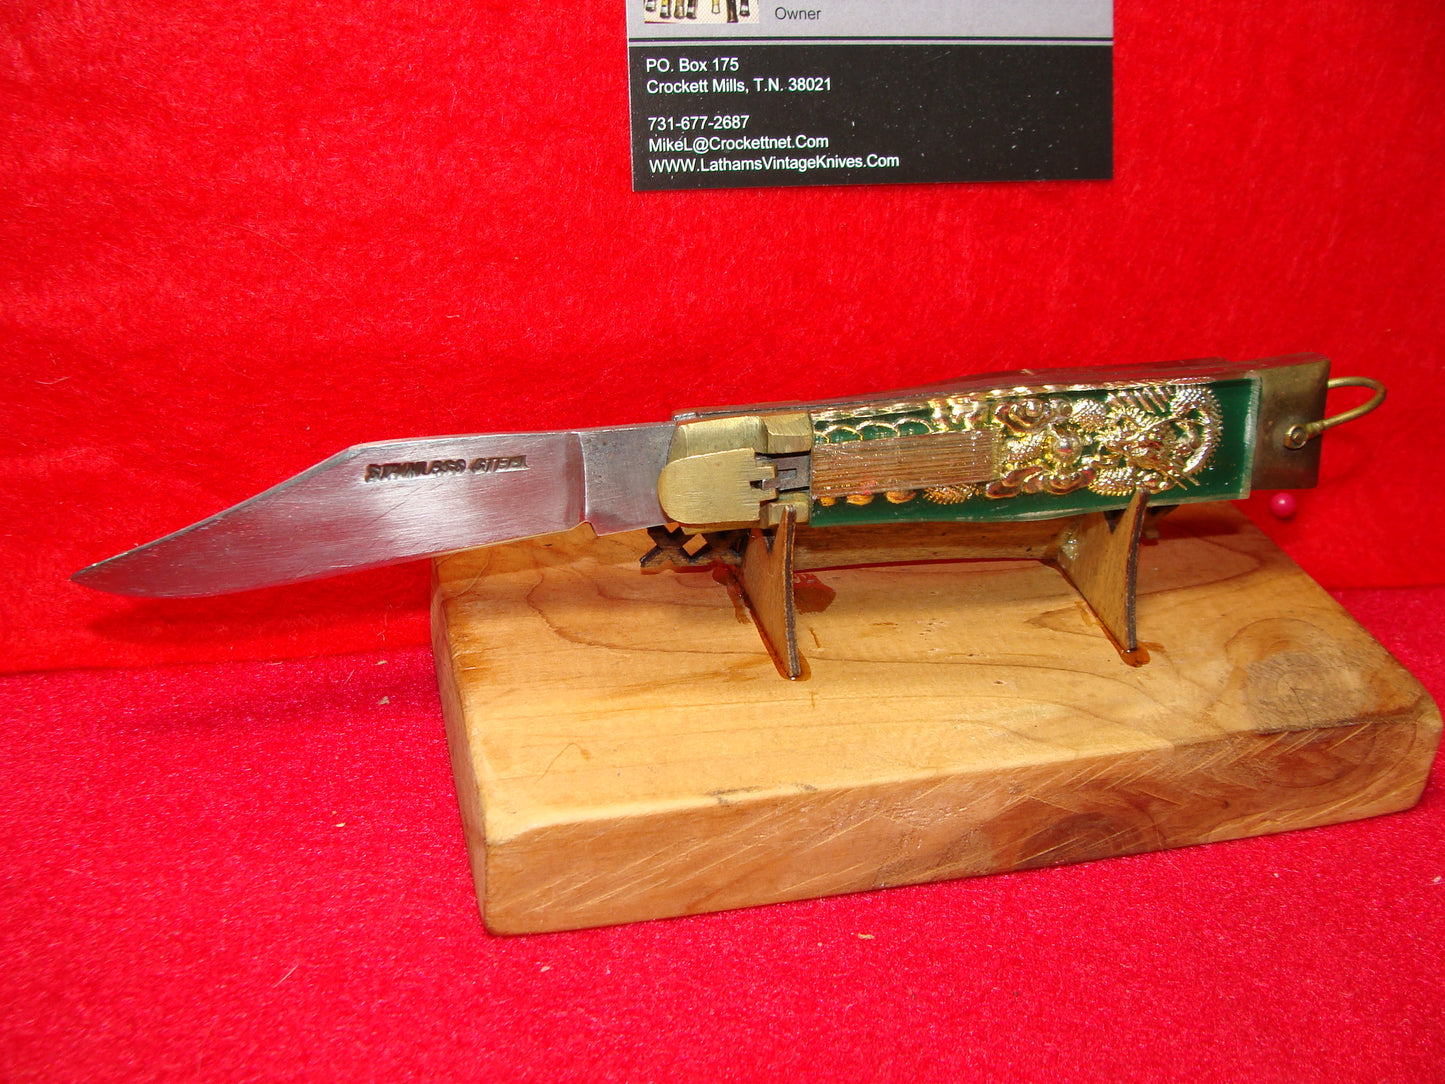 STAINLESS STEEL MEXICO BULL FIGHTER 1960-70 LEVER AUTOMATIC JAPAN AUTOMATIC KNIFE GREEN PICTURE ART HANDLES